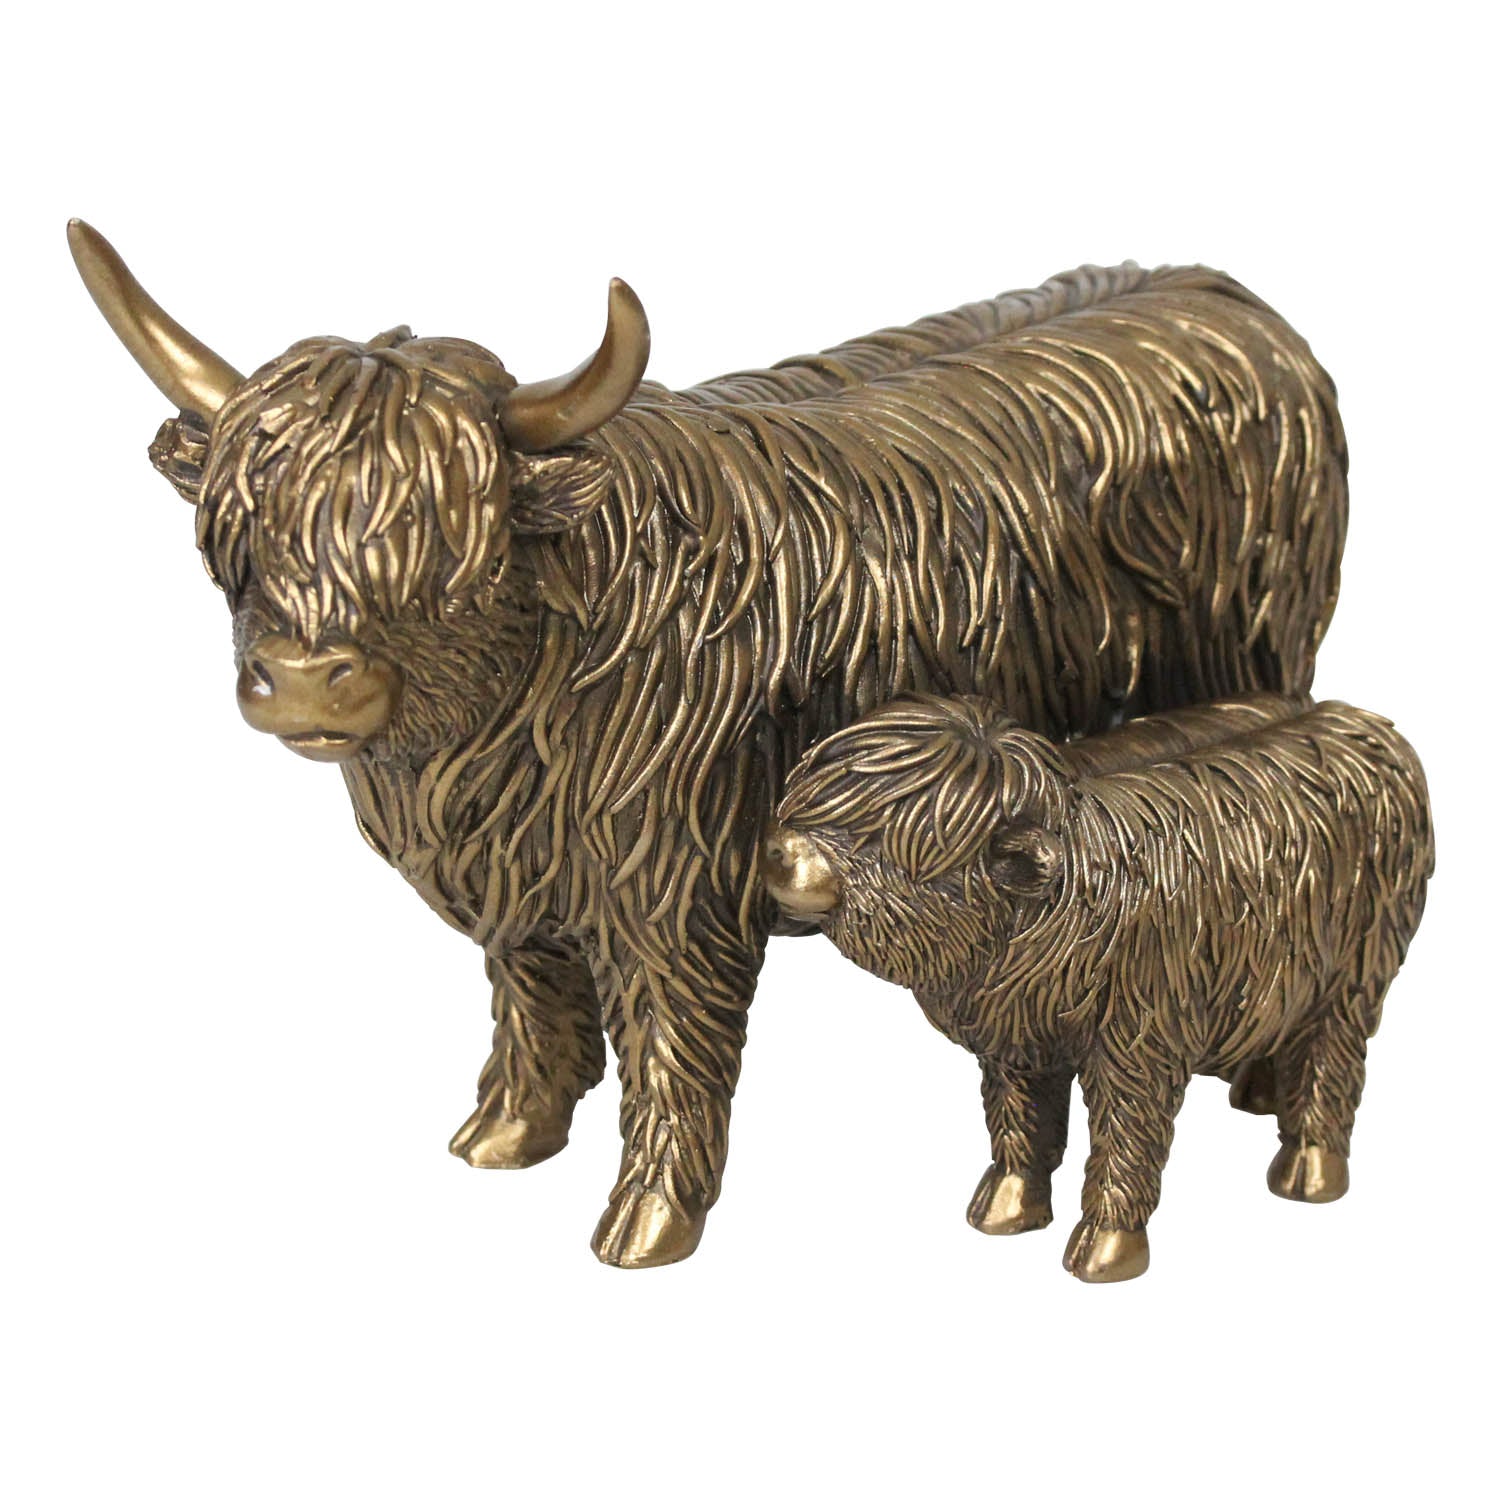 Bronze Highland Cow and Calf Ornament